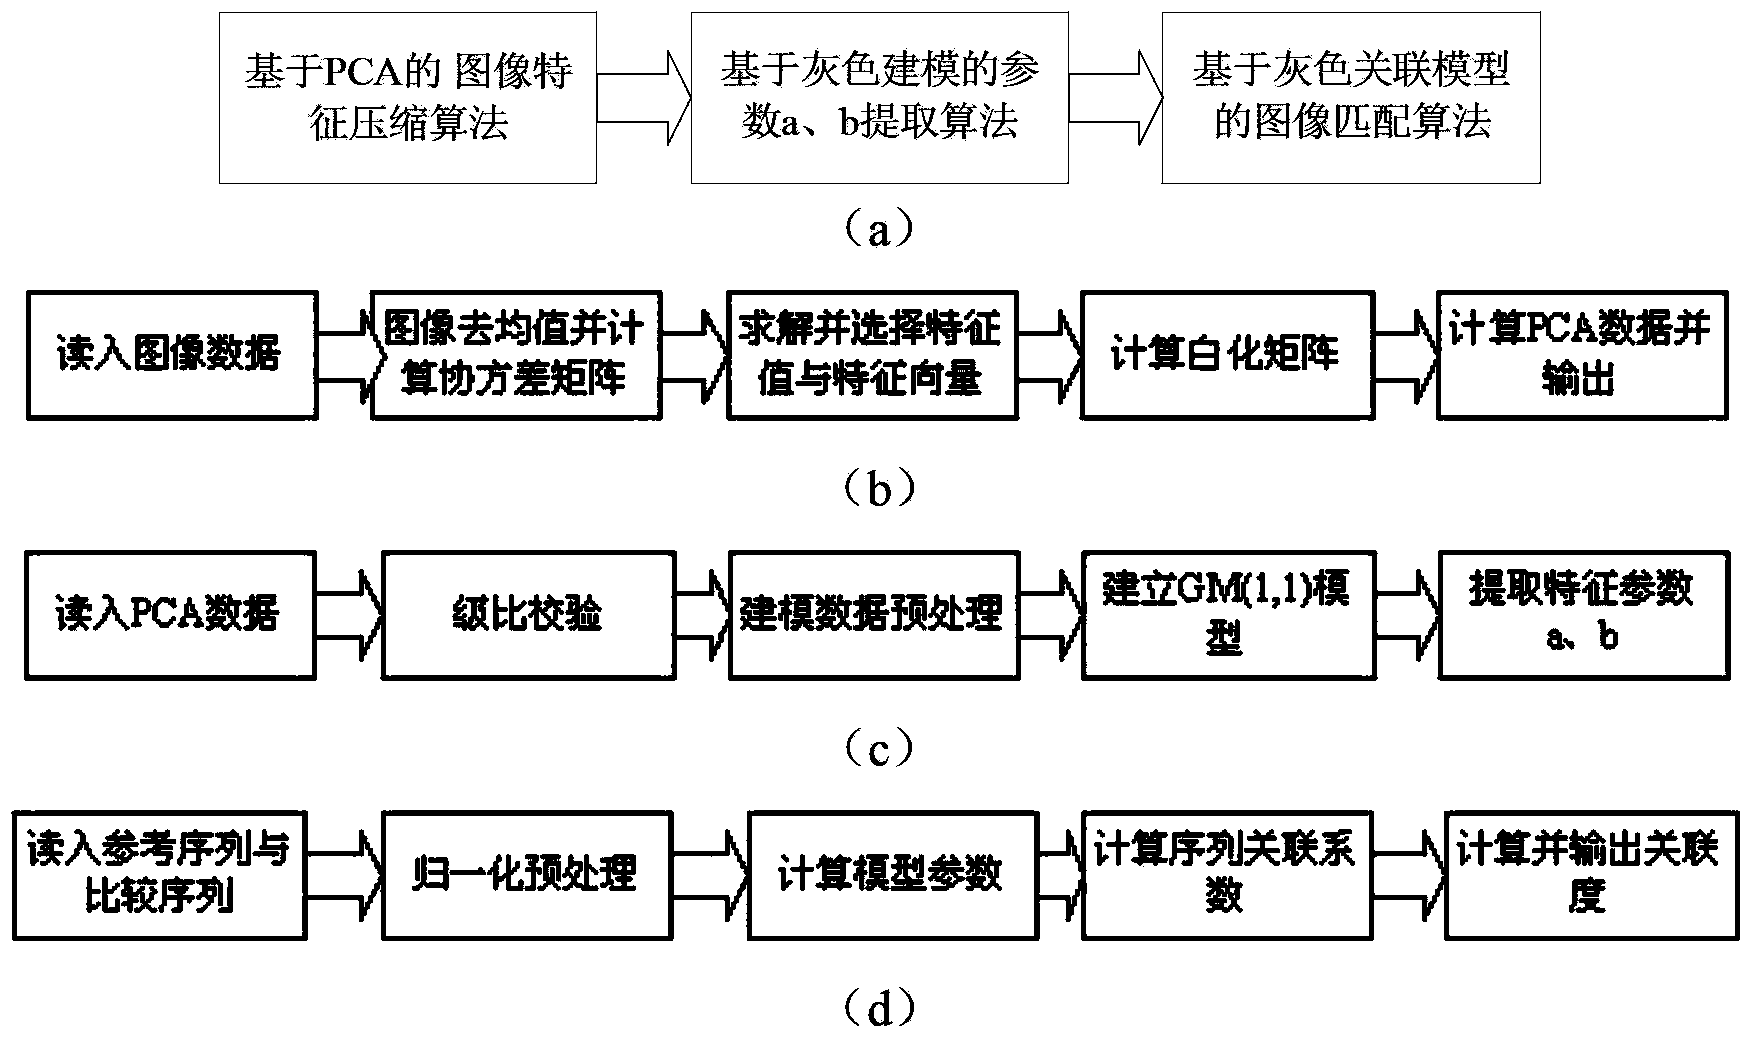 Image encryption and decryption method for utilizing gray system theory to confirm ICA output